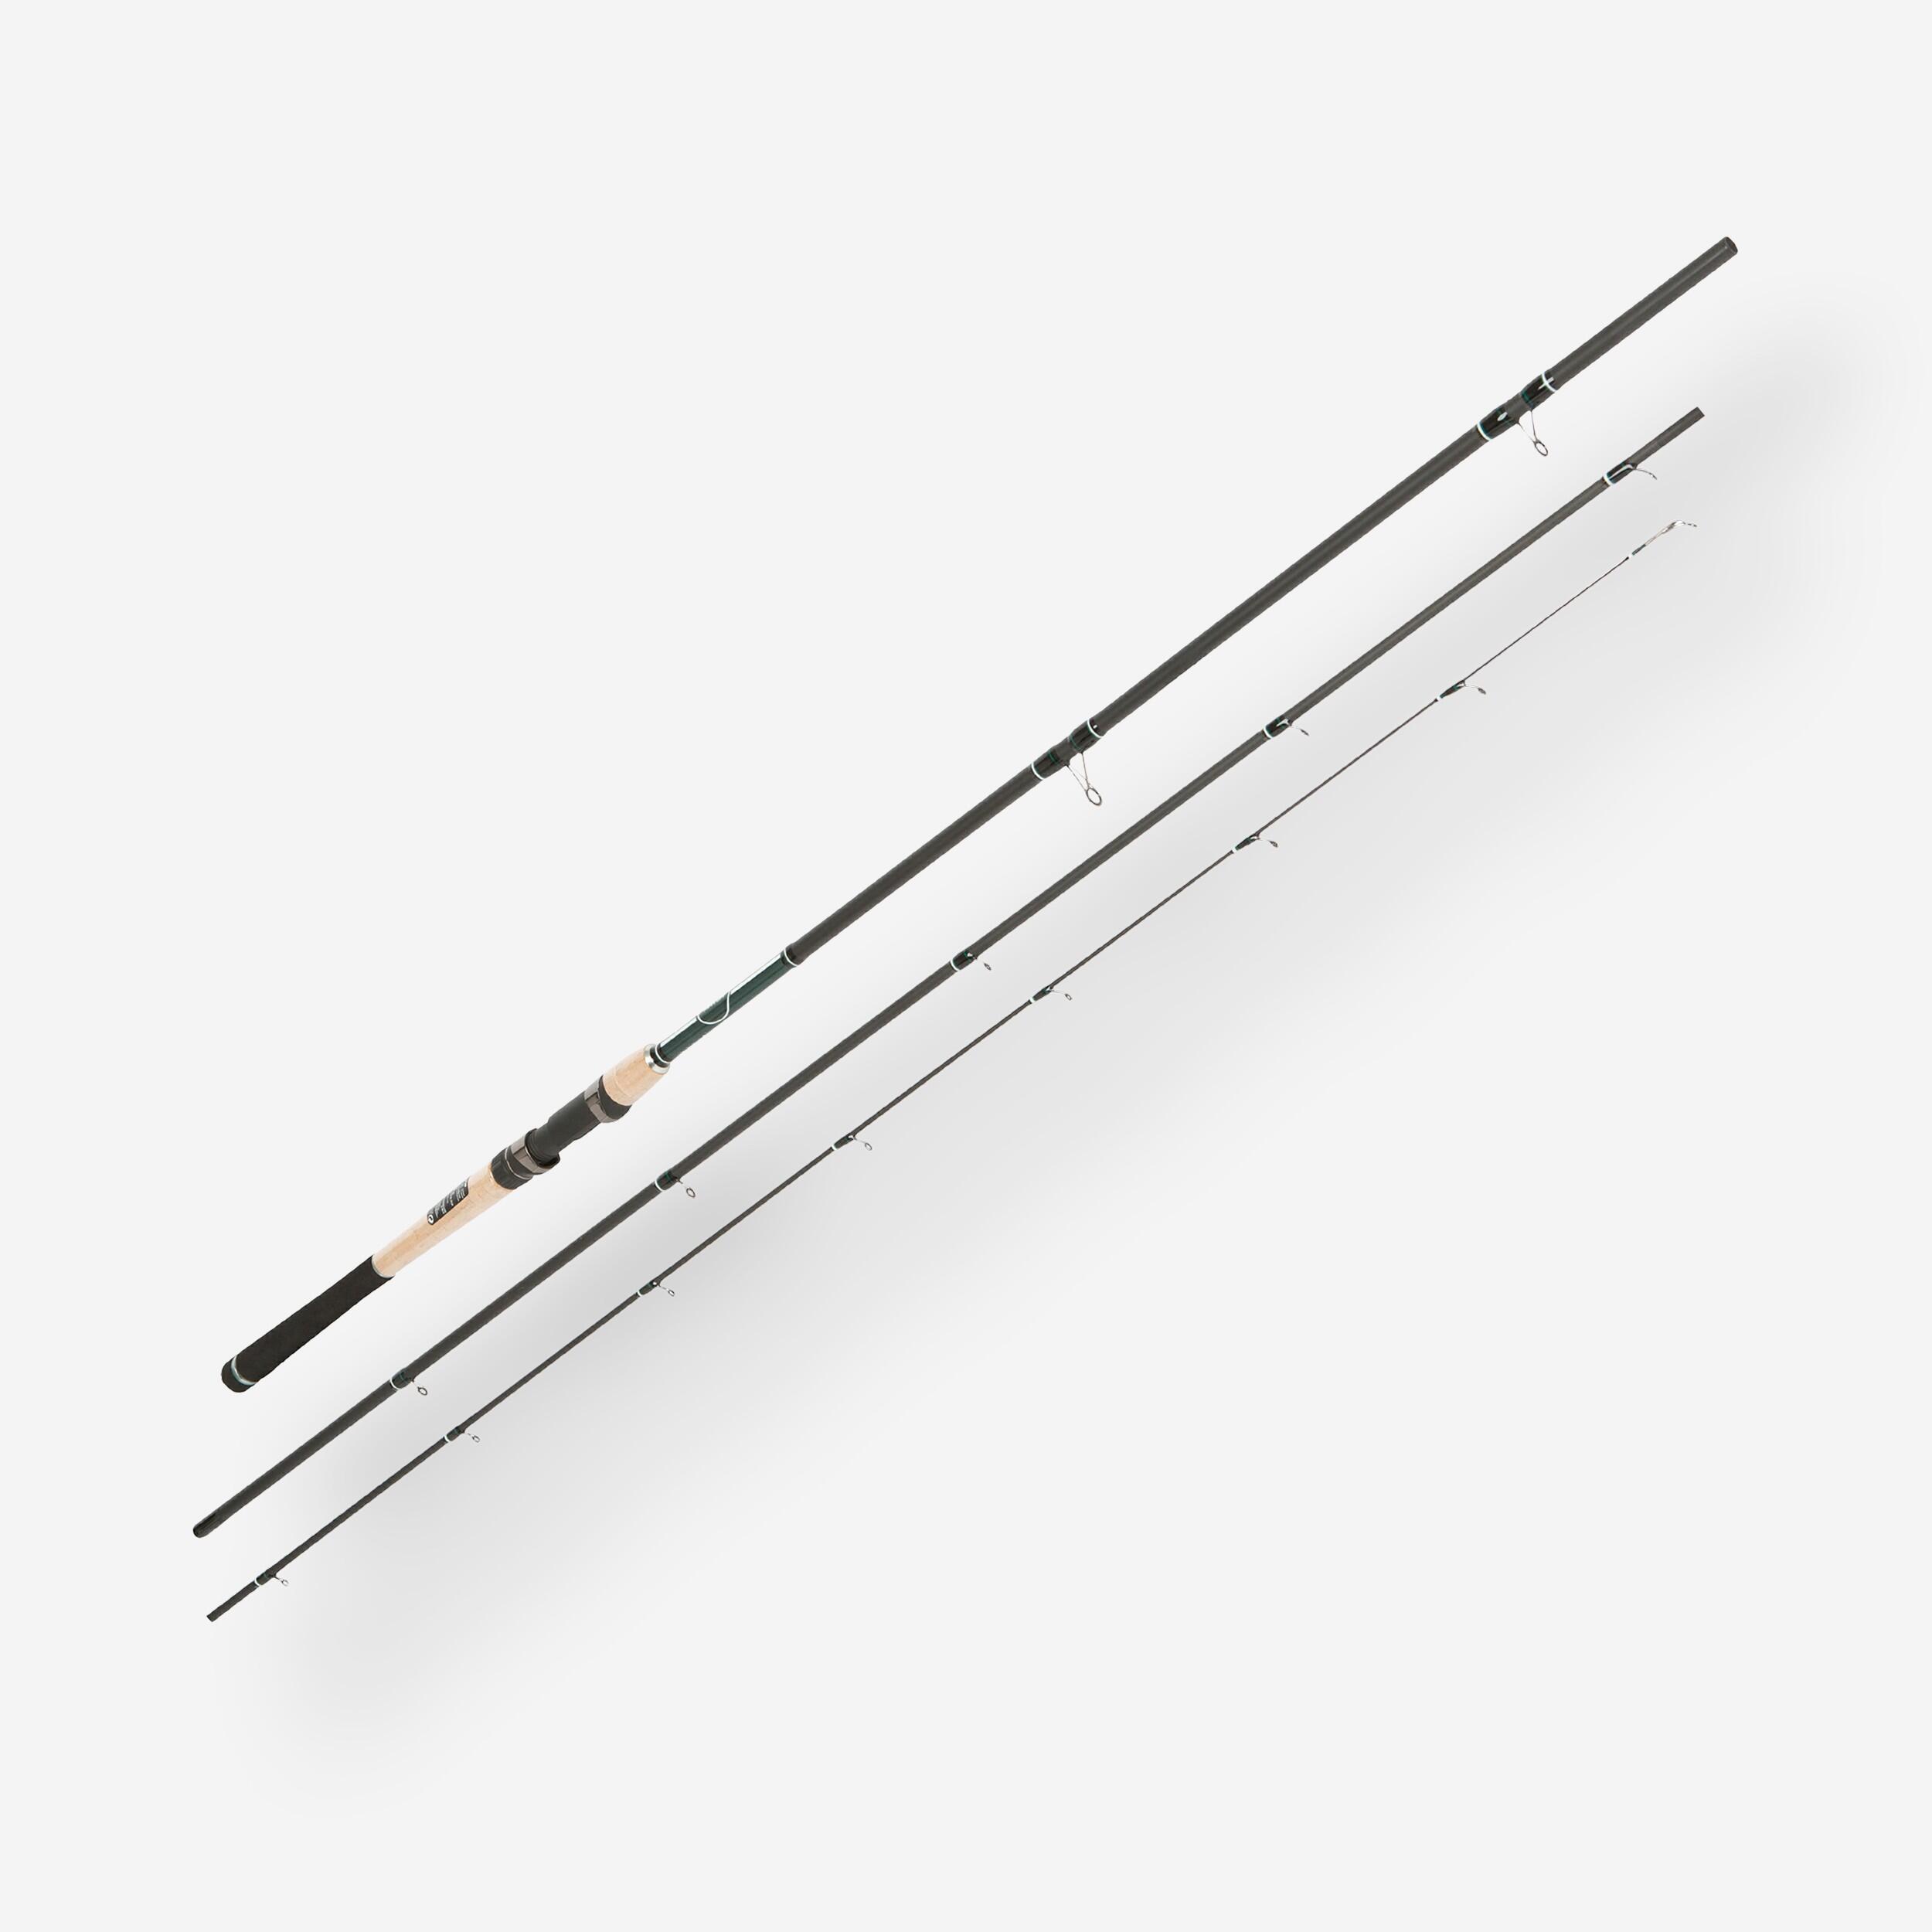 Discover Float Fishing Rod & Reel Combo